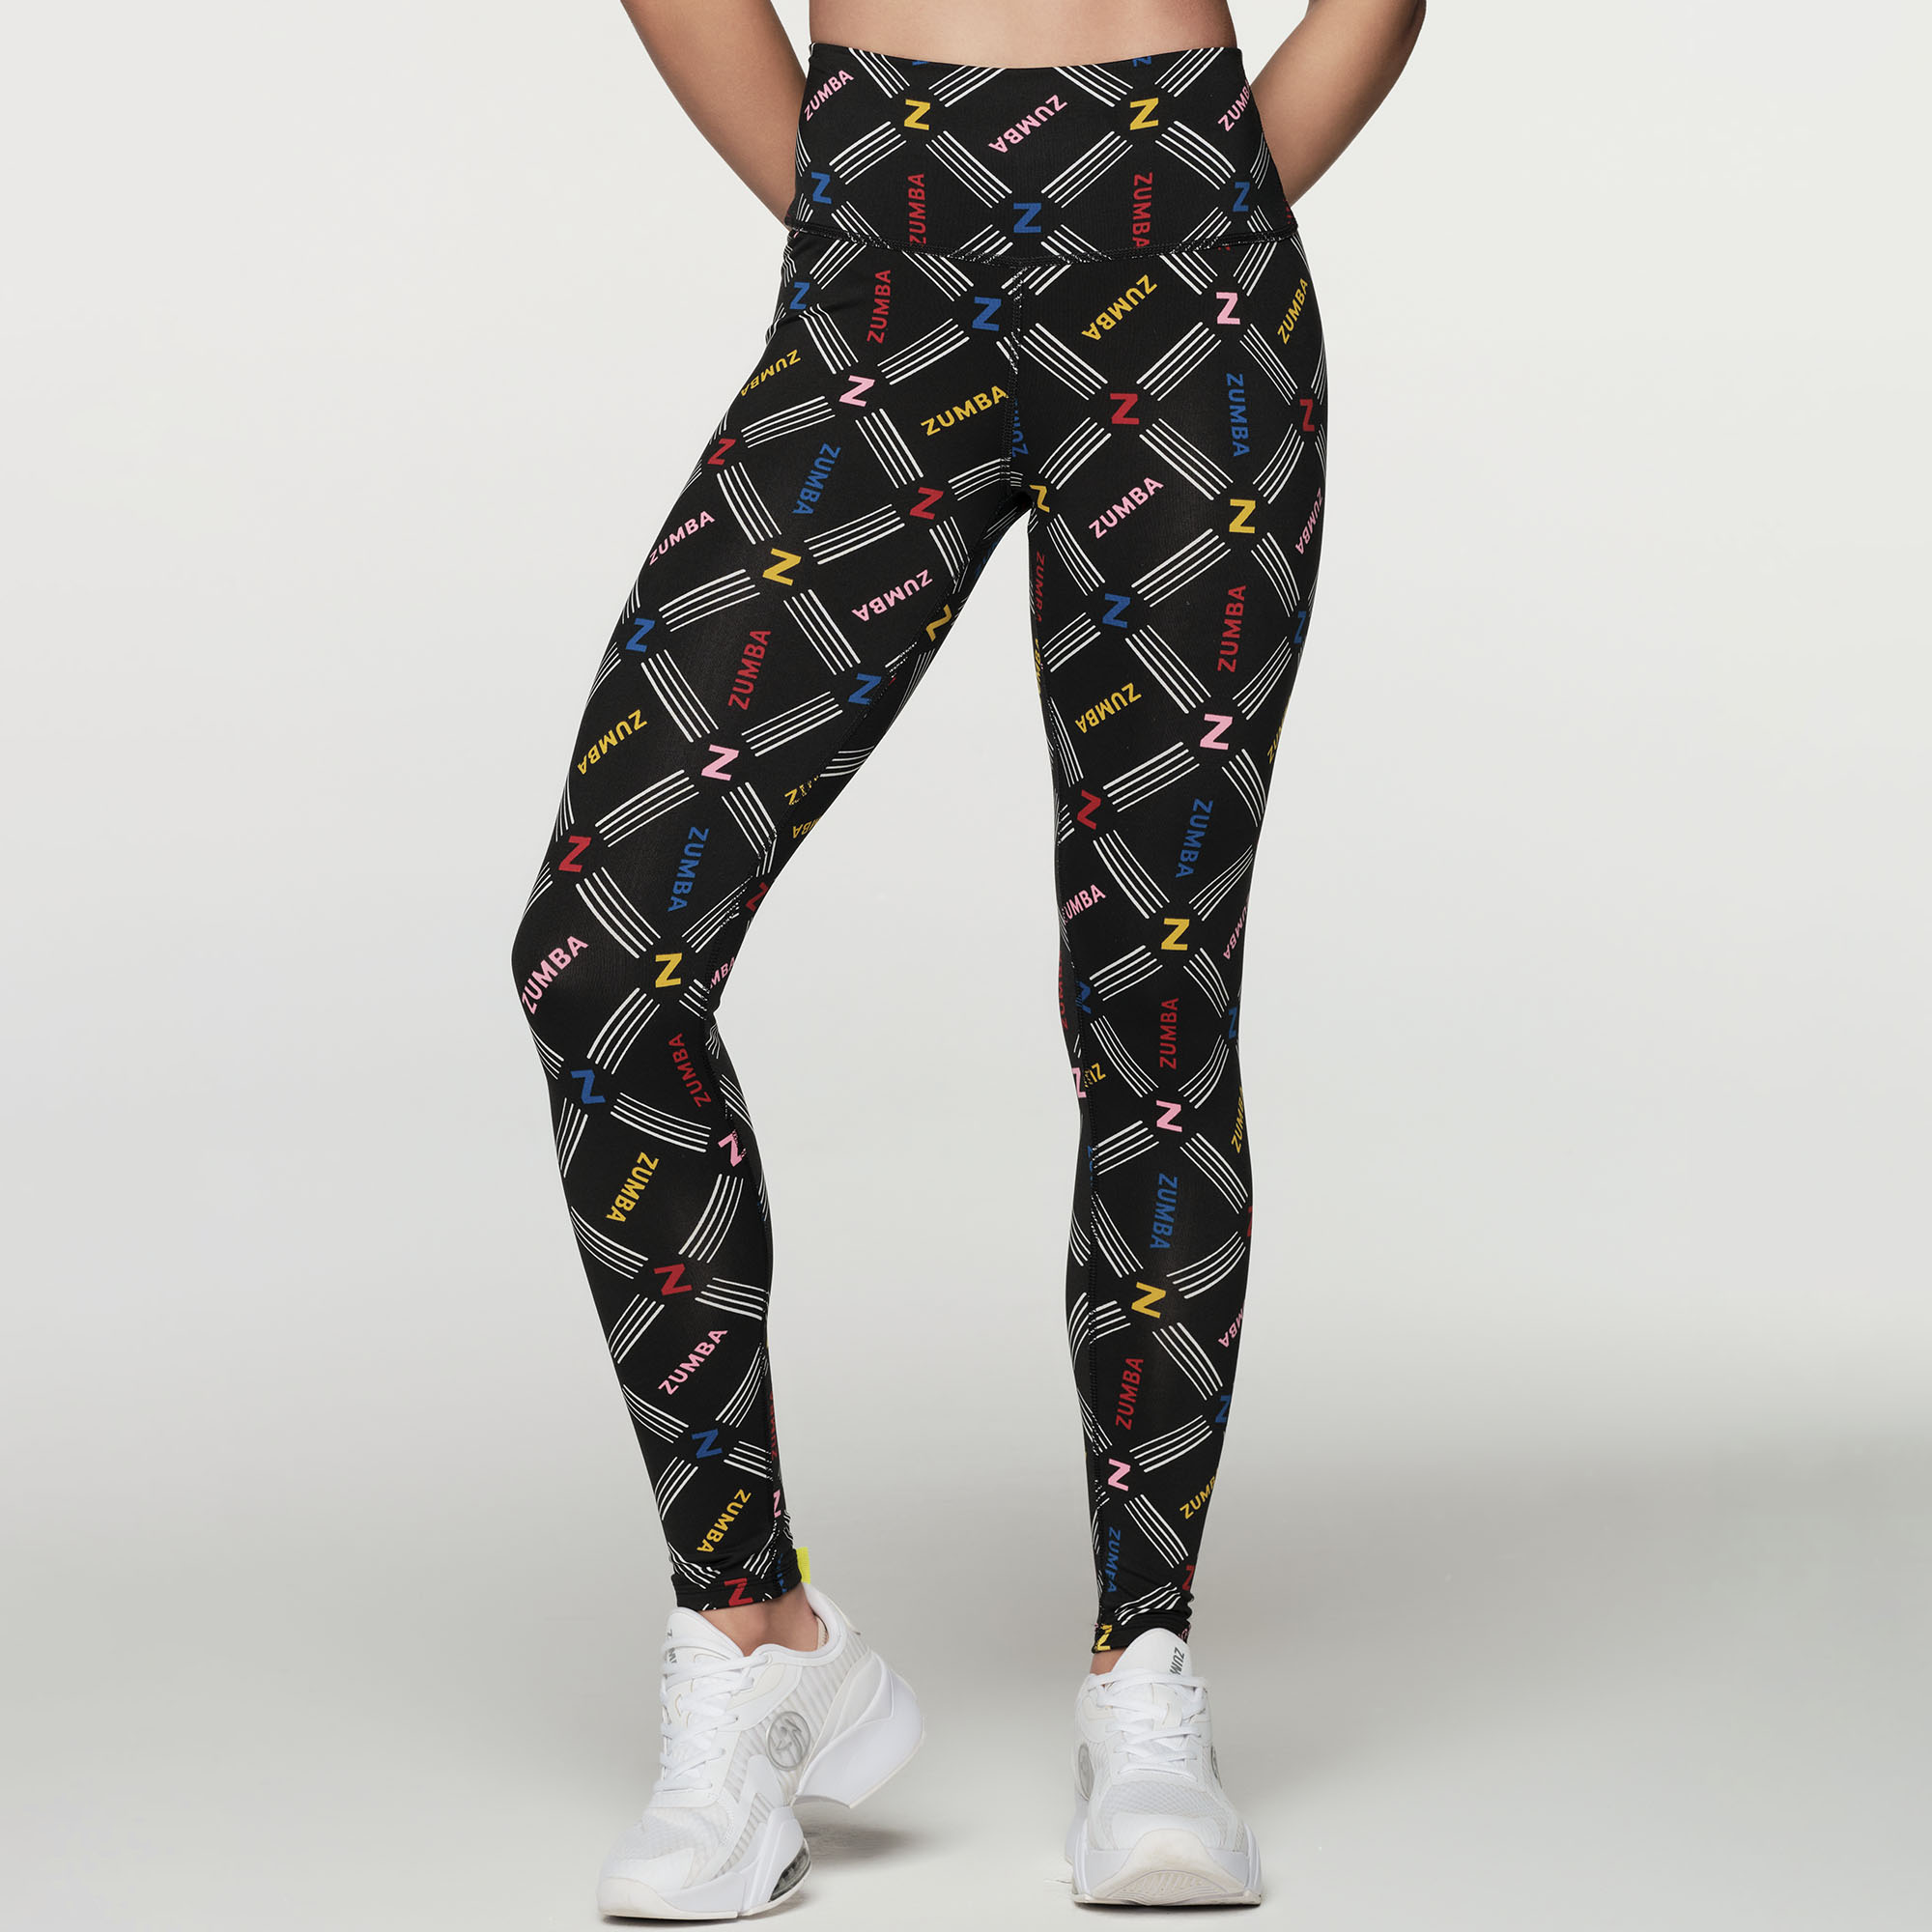 Latinfit Middle East – Zumbawear Apparel